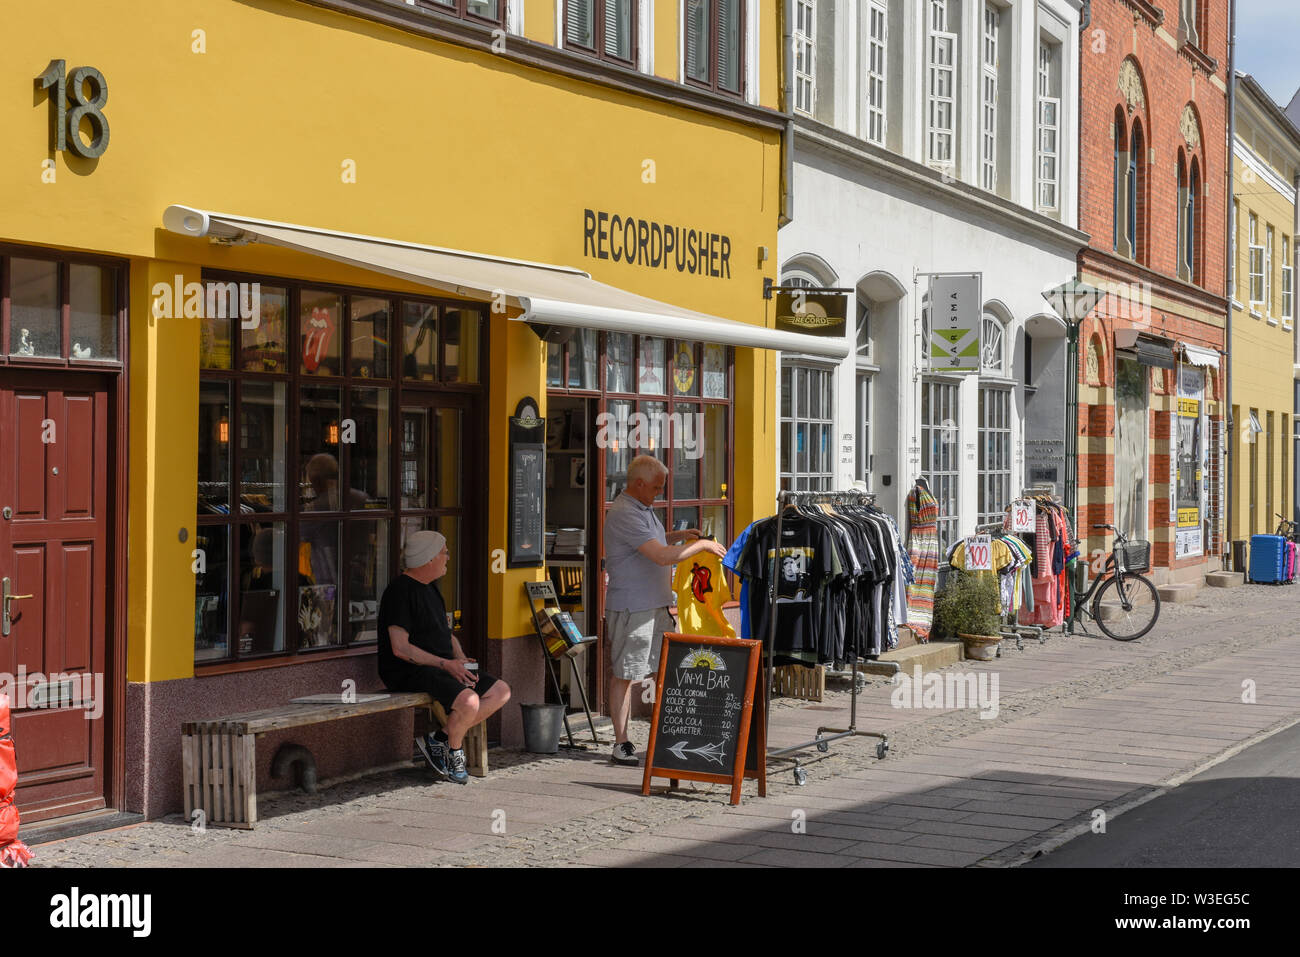 Odense Denmark 24 June 19 People Shopping In The Old Houses Of Odense On Denmark Stock Photo Alamy